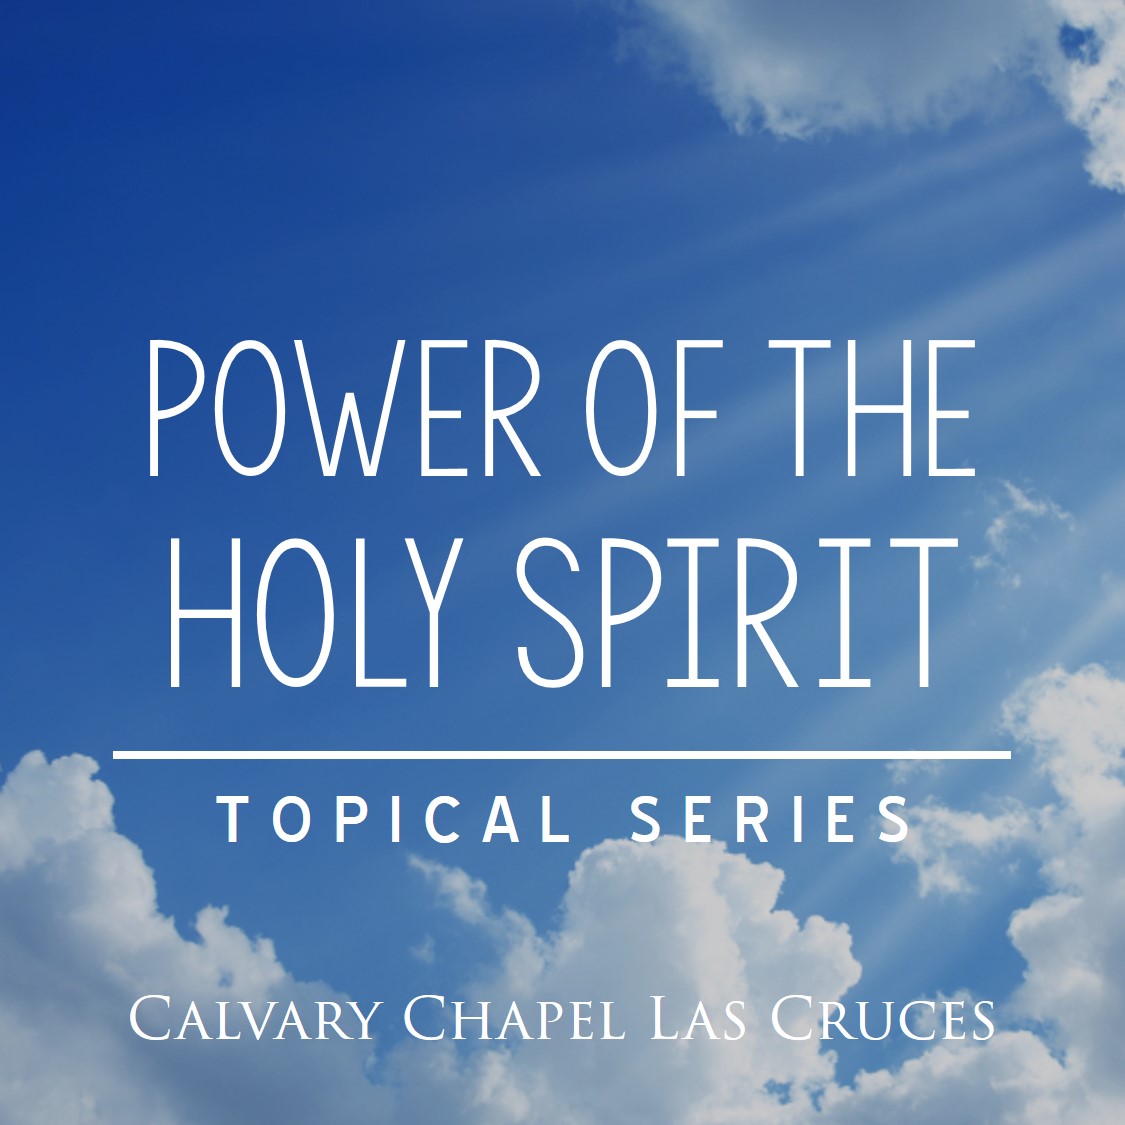 The Power of the Holy Spirit, Part 10